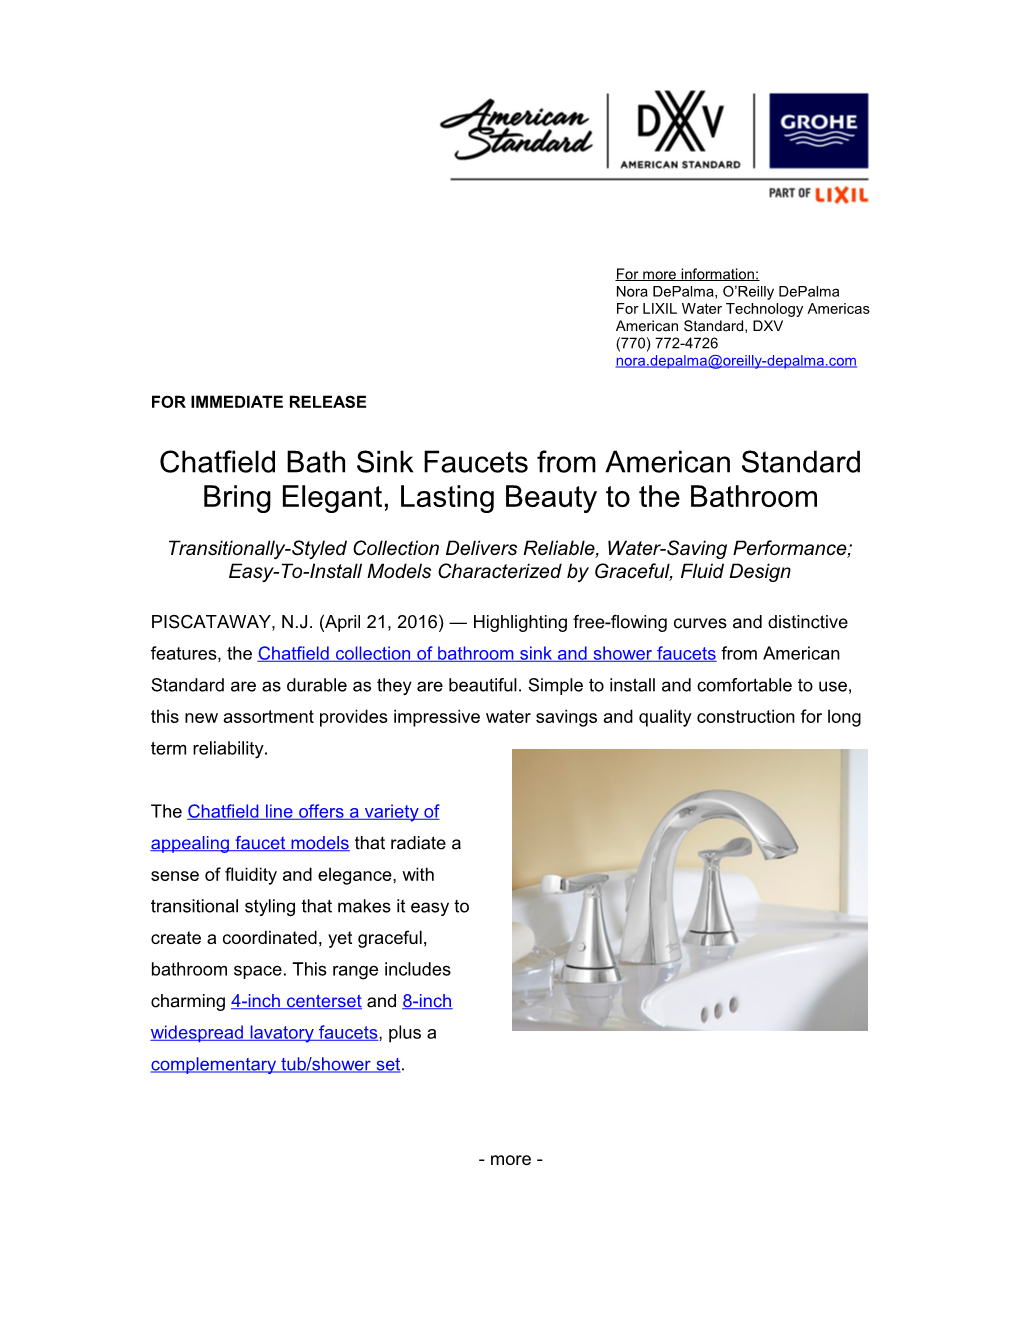 Chatfield Bath Sink Faucets from American Standard Bring Elegant, Lasting Beauty to The